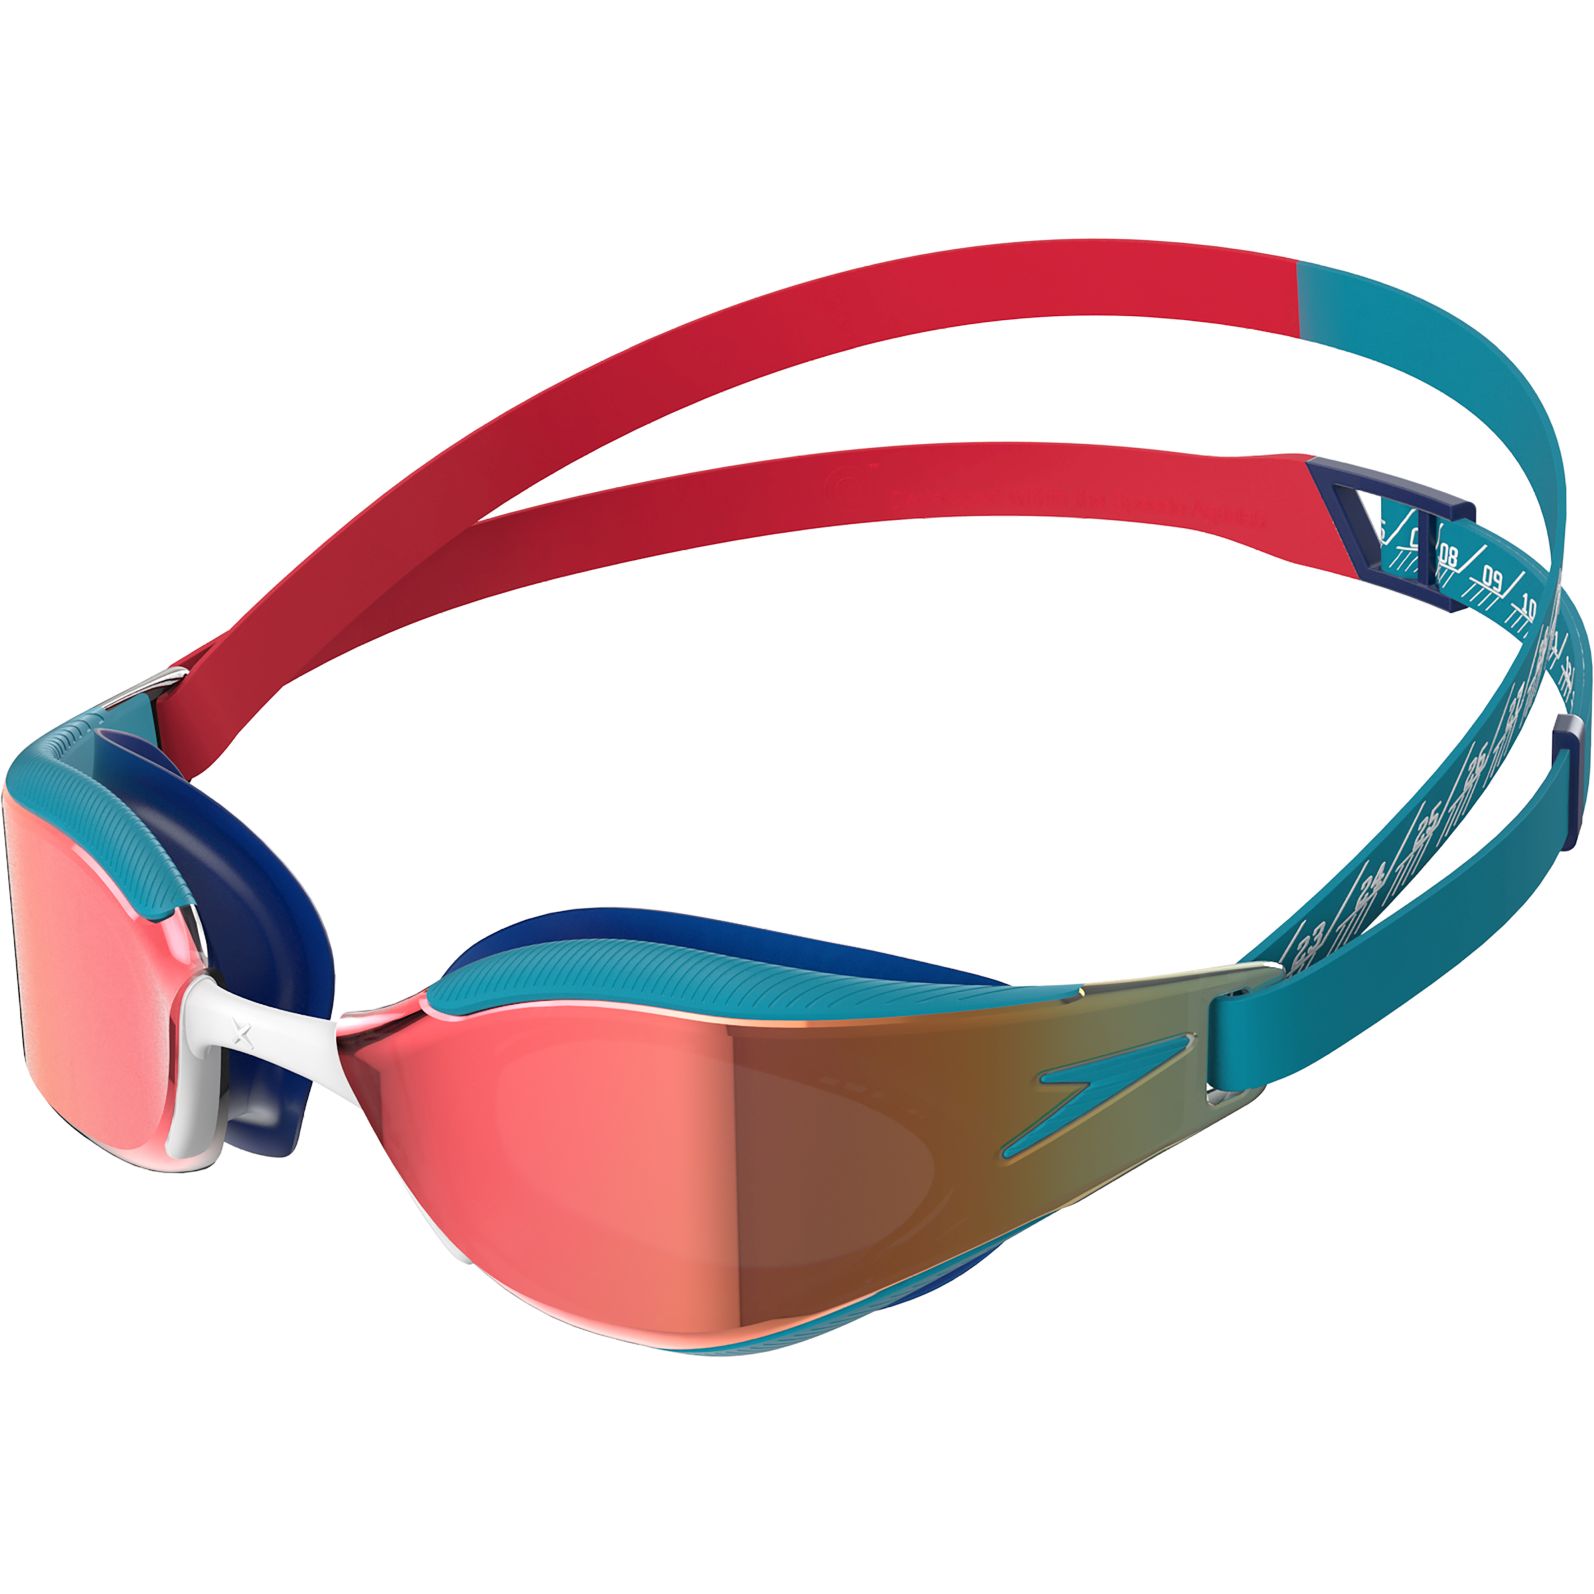 Picture of Speedo Fastskin Hyper Elite Mirror Junior Swimming Goggles - flame red/bolt/smoke/shadow